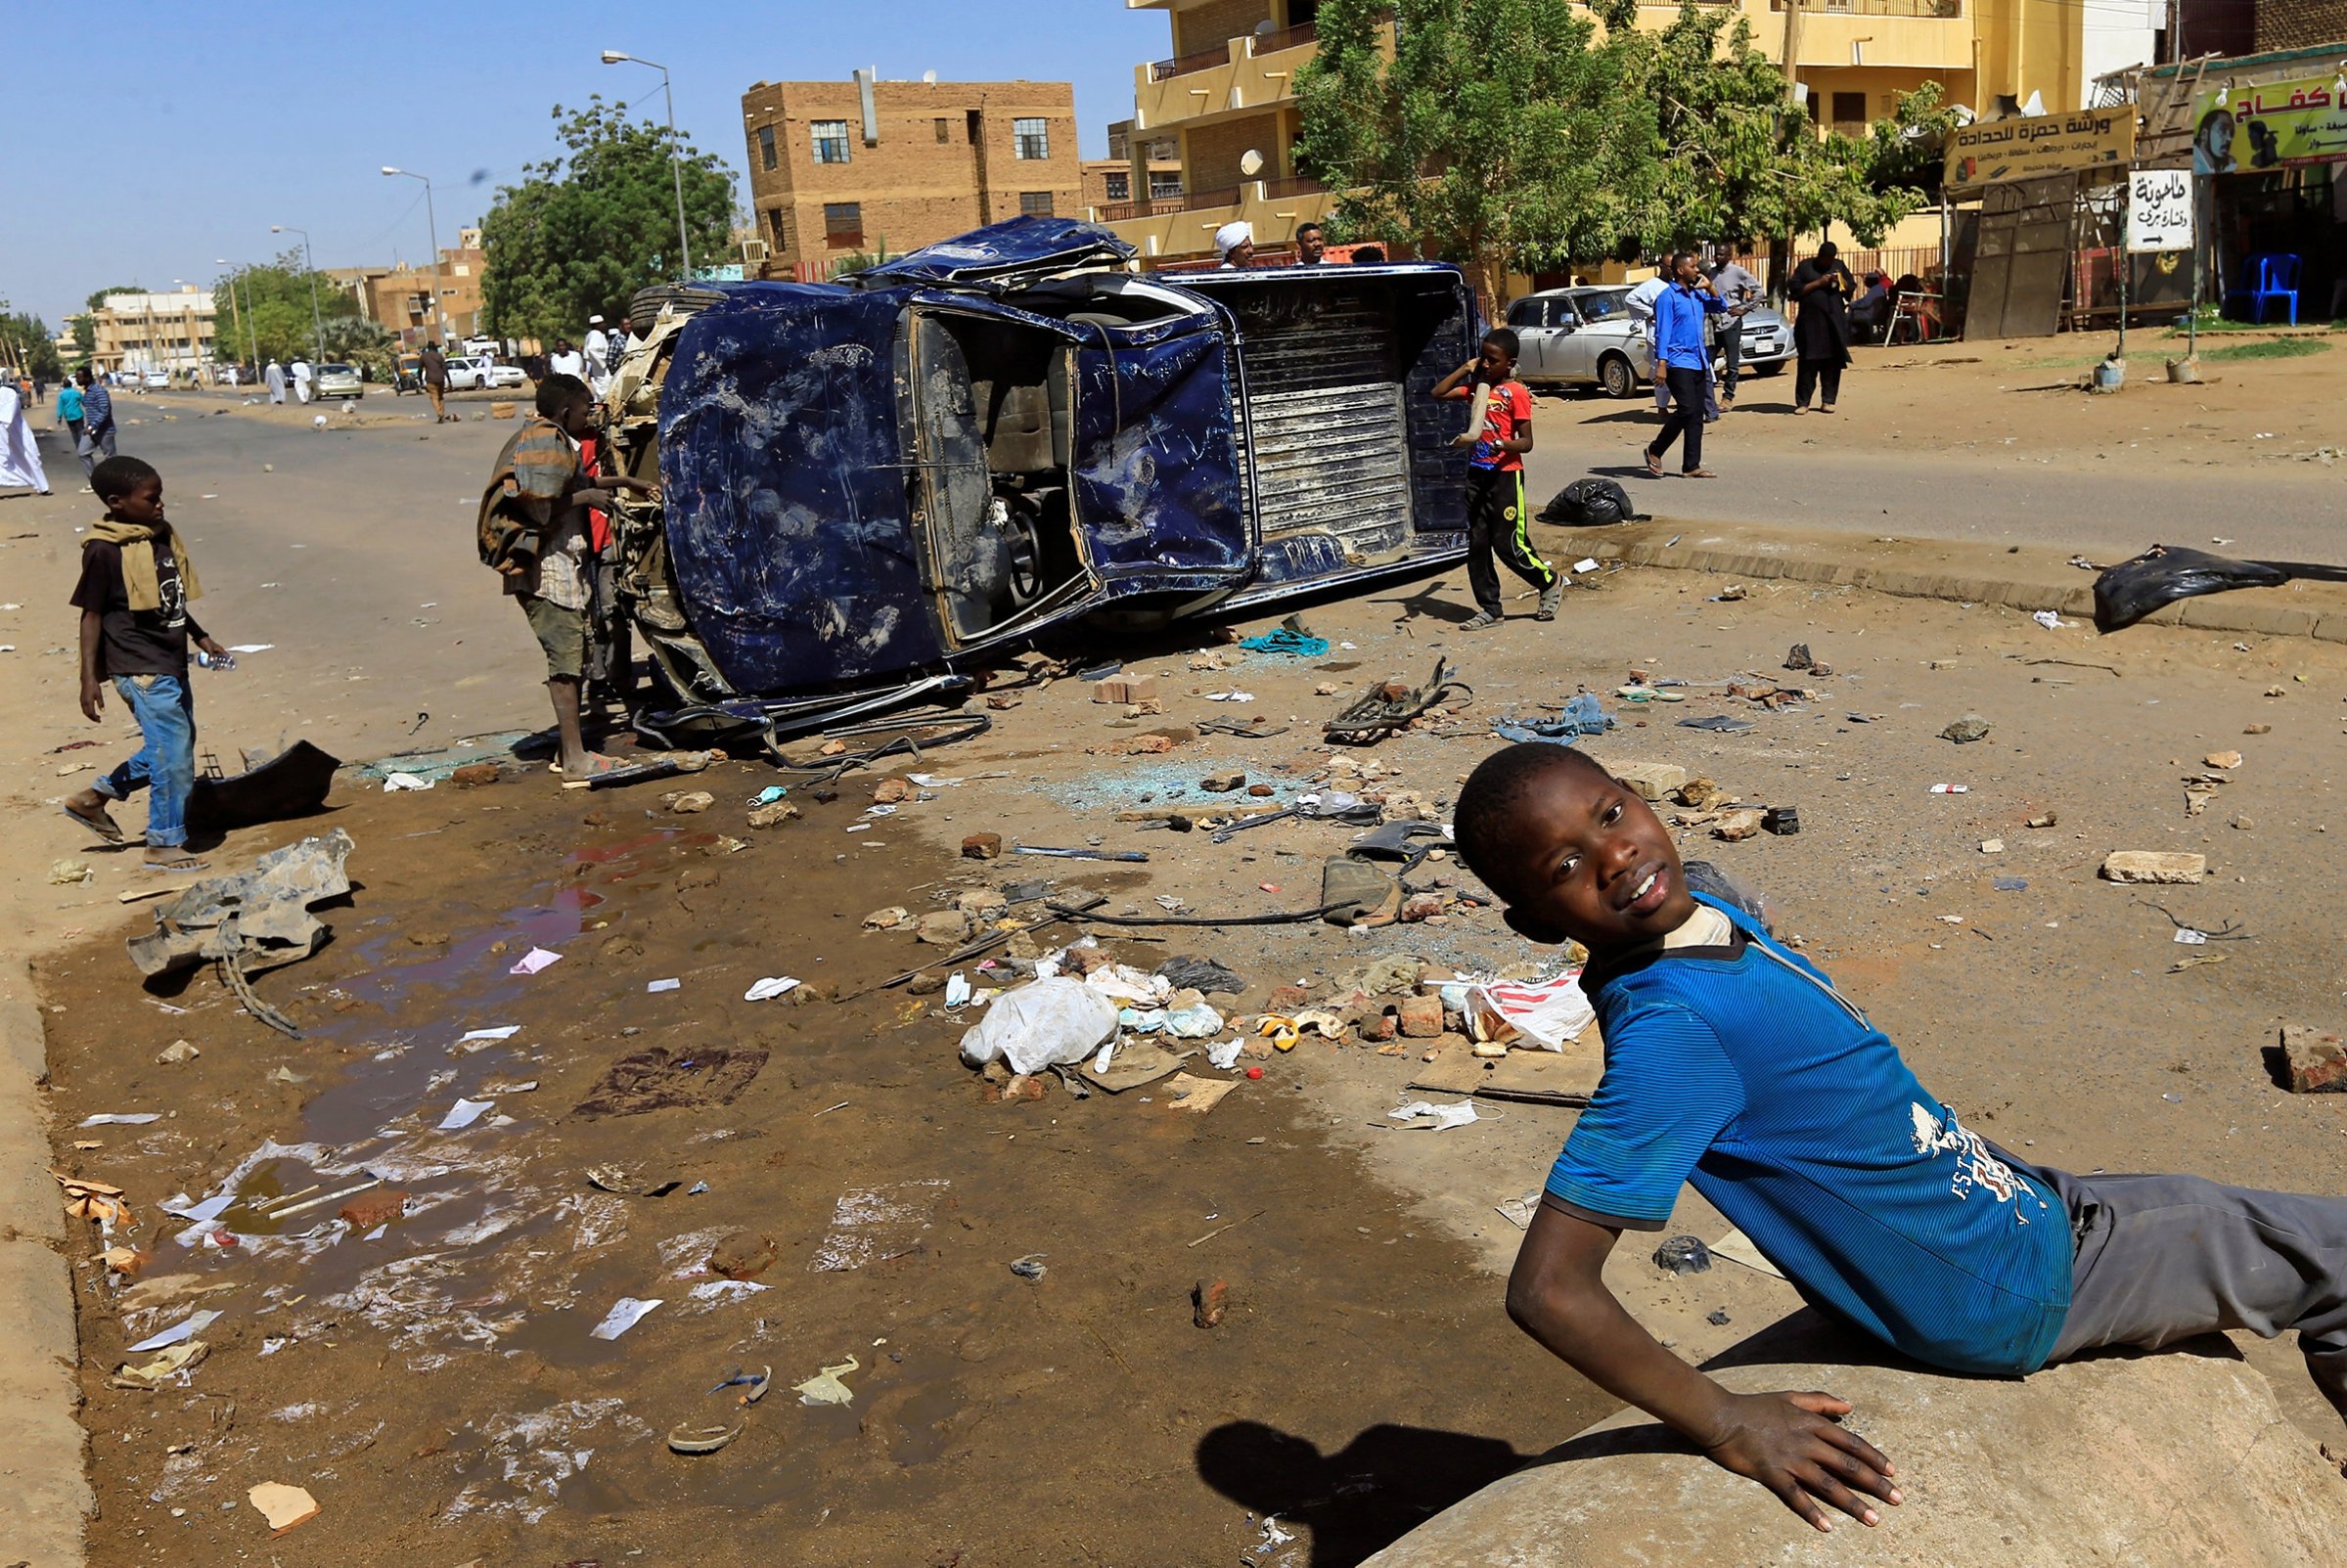 Children play near a police car flipped over and damaged by mourners near the home of a demonstrator who died of a gunshot wound sustained during anti-government protests in Khartoum, Sudan January 18, 2019.